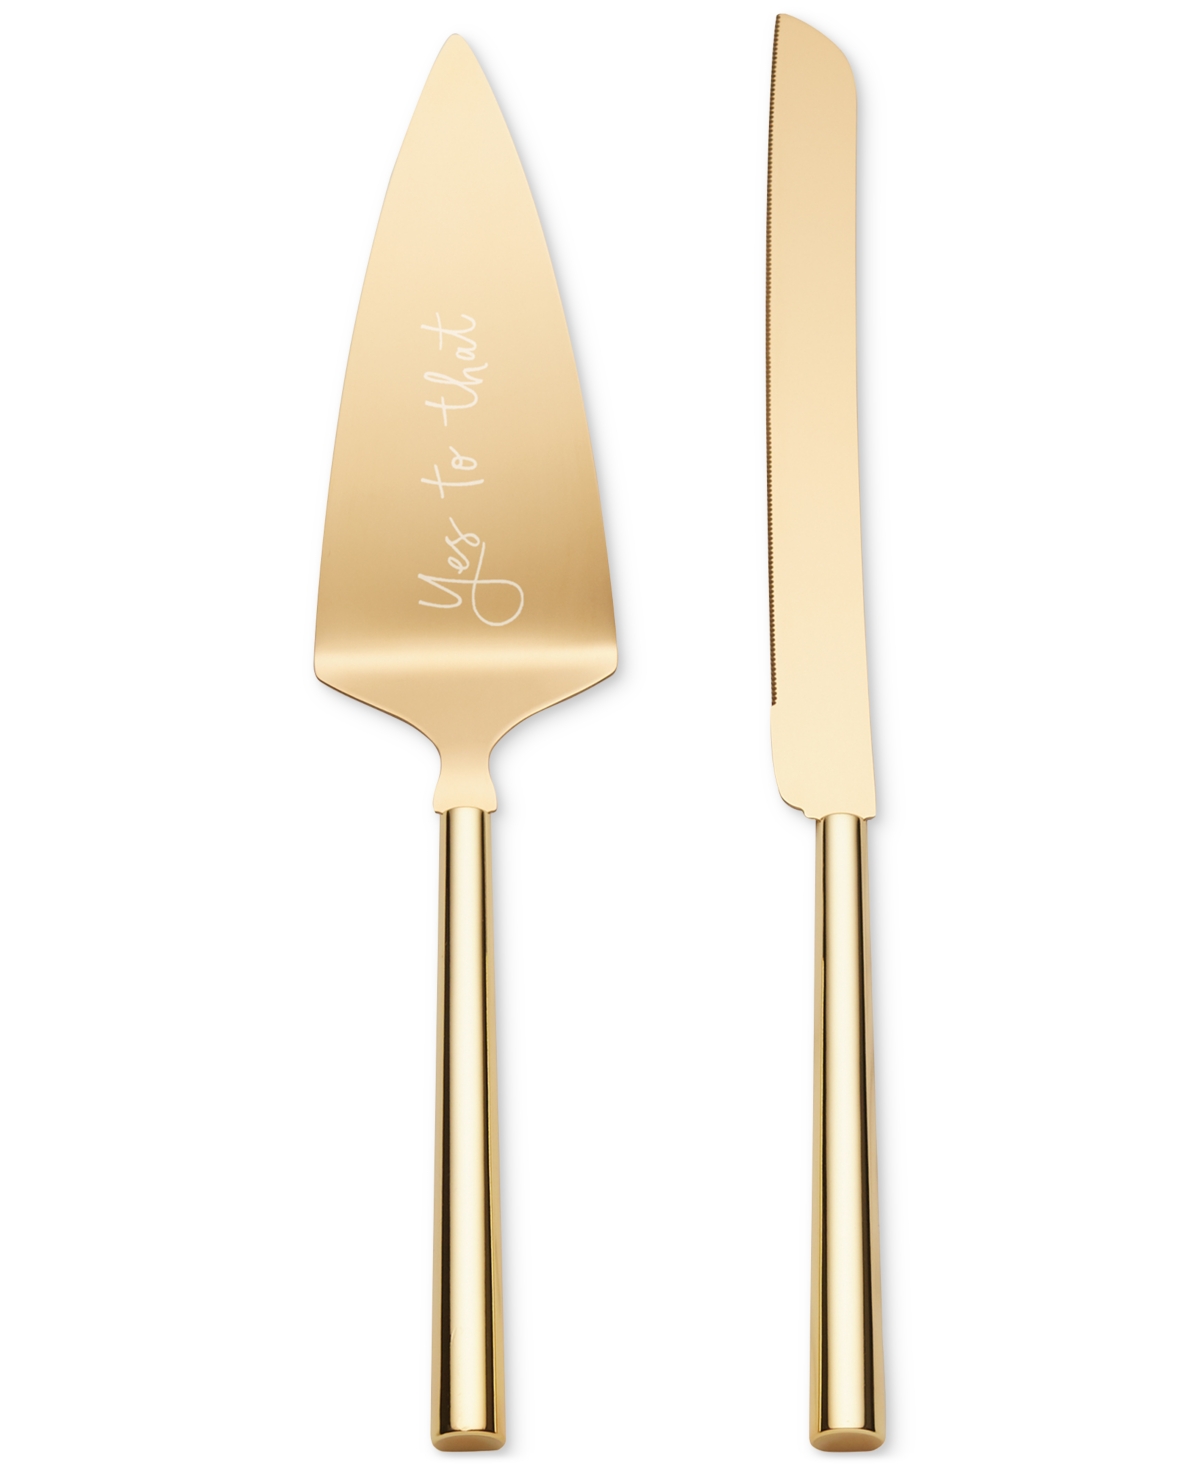 Kate Spade New York Yes To That 2-piece Dessert Set In Gold